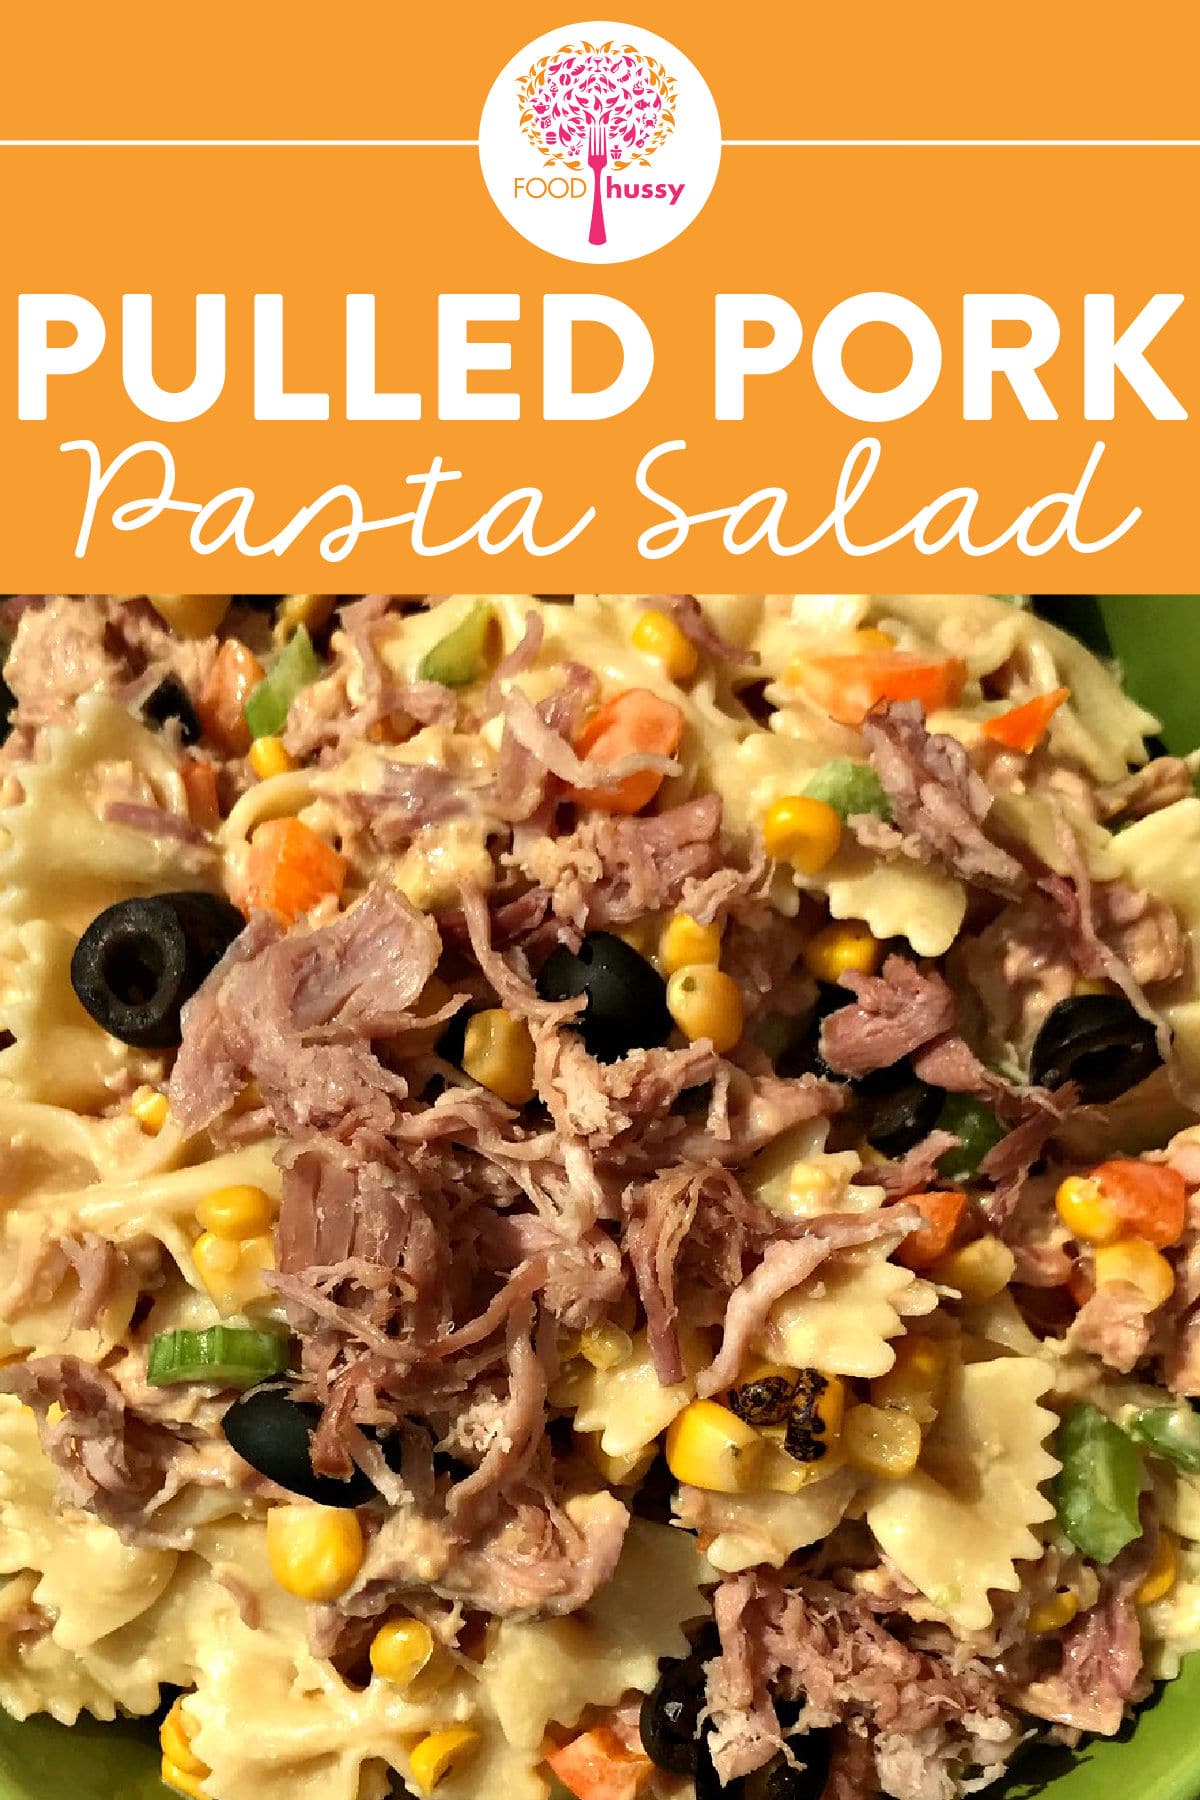 Pulled Pork Pasta Salad is a perfect summer salad for potlucks or any weeknight dinner. I'm using pre-cooked pulled pork and BBQ sauce instead of mayo - so it's creamy and hearty!  via @foodhussy